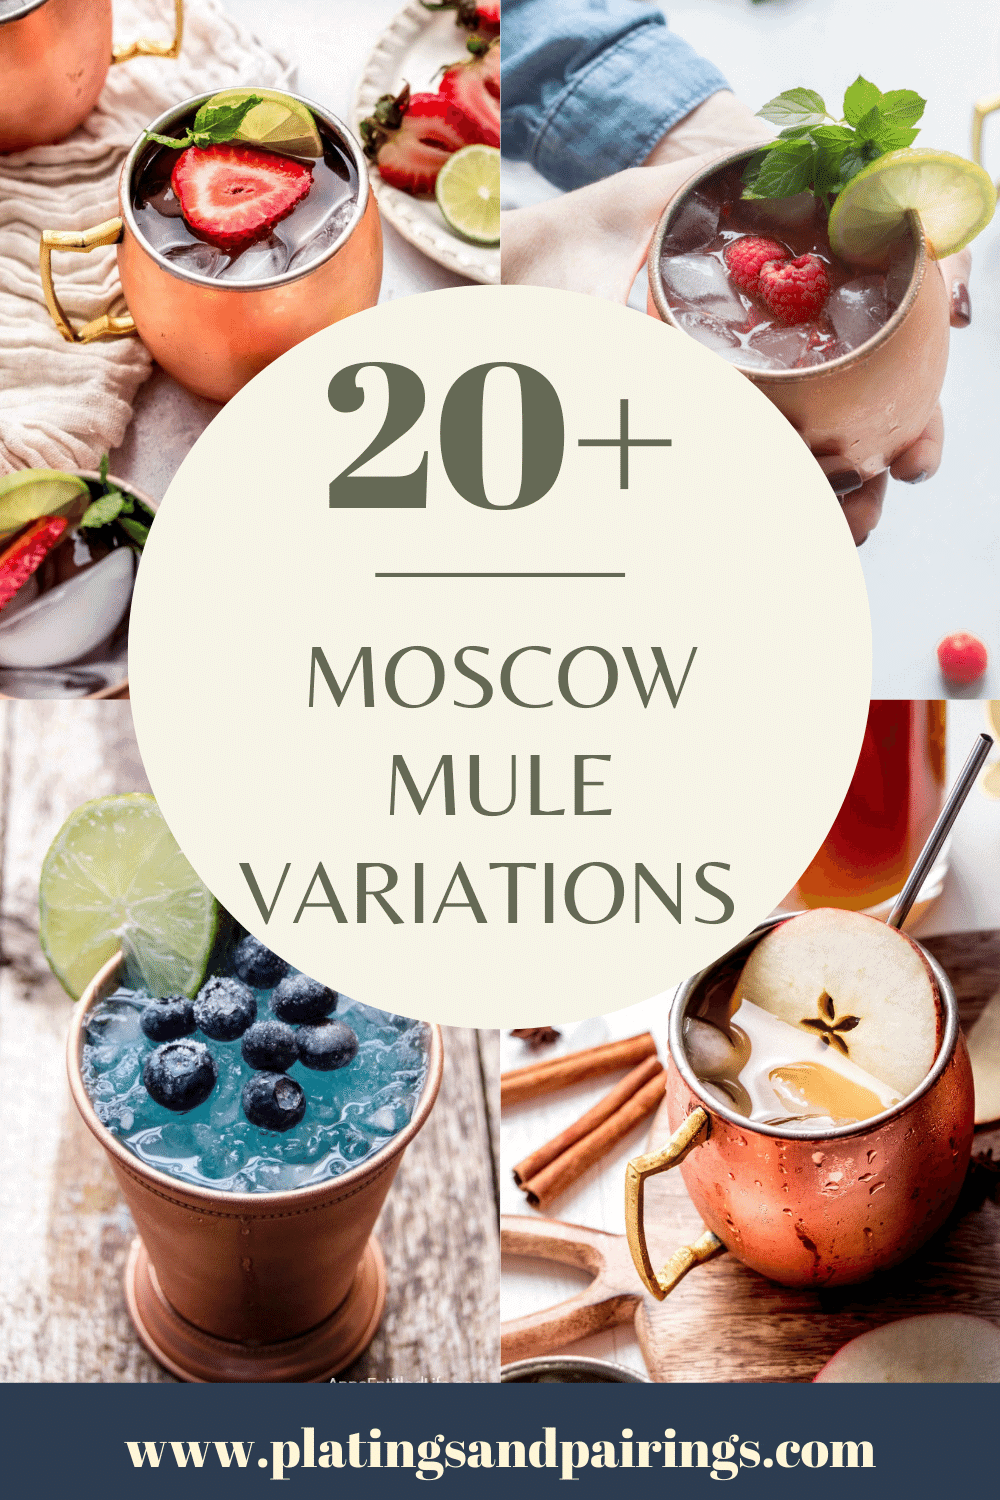 Collage of moscow mule cocktails with text overlay.